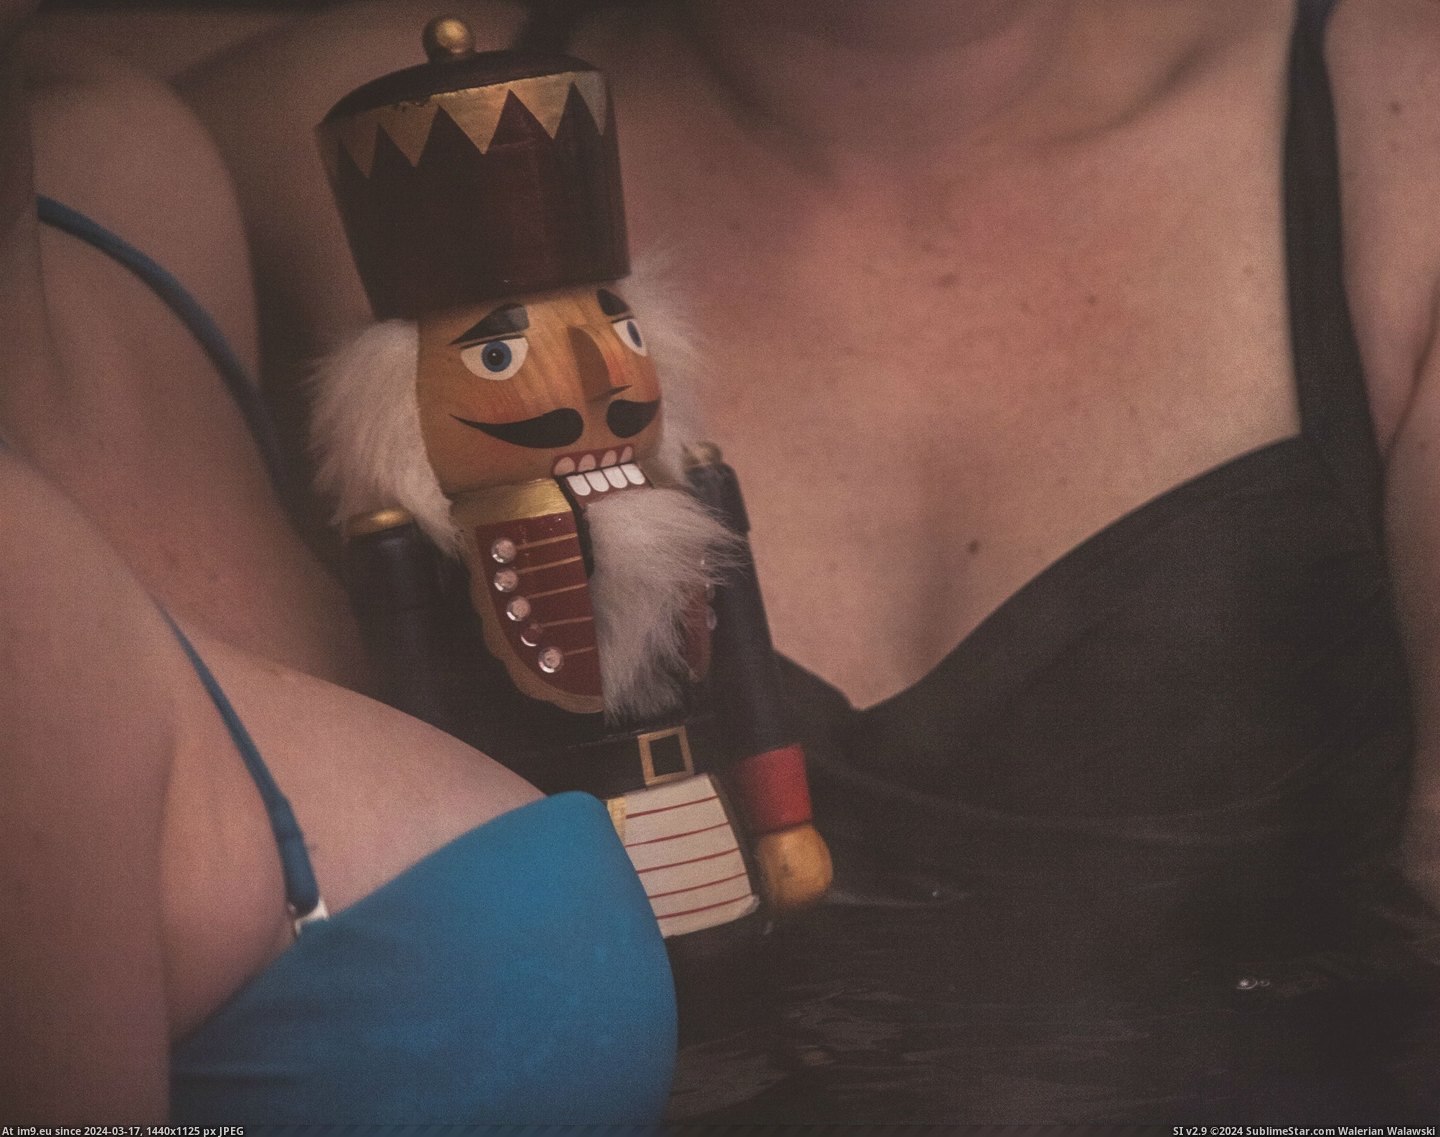 #For #Year #Friend #Stole #Nutcracker #Amazing #Christmas #Got [Pics] Last Christmas I stole my friend's nutcracker - this year, he got these back: 'most amazing thing anyone has done for me  Pic. (Изображение из альбом My r/PICS favs))